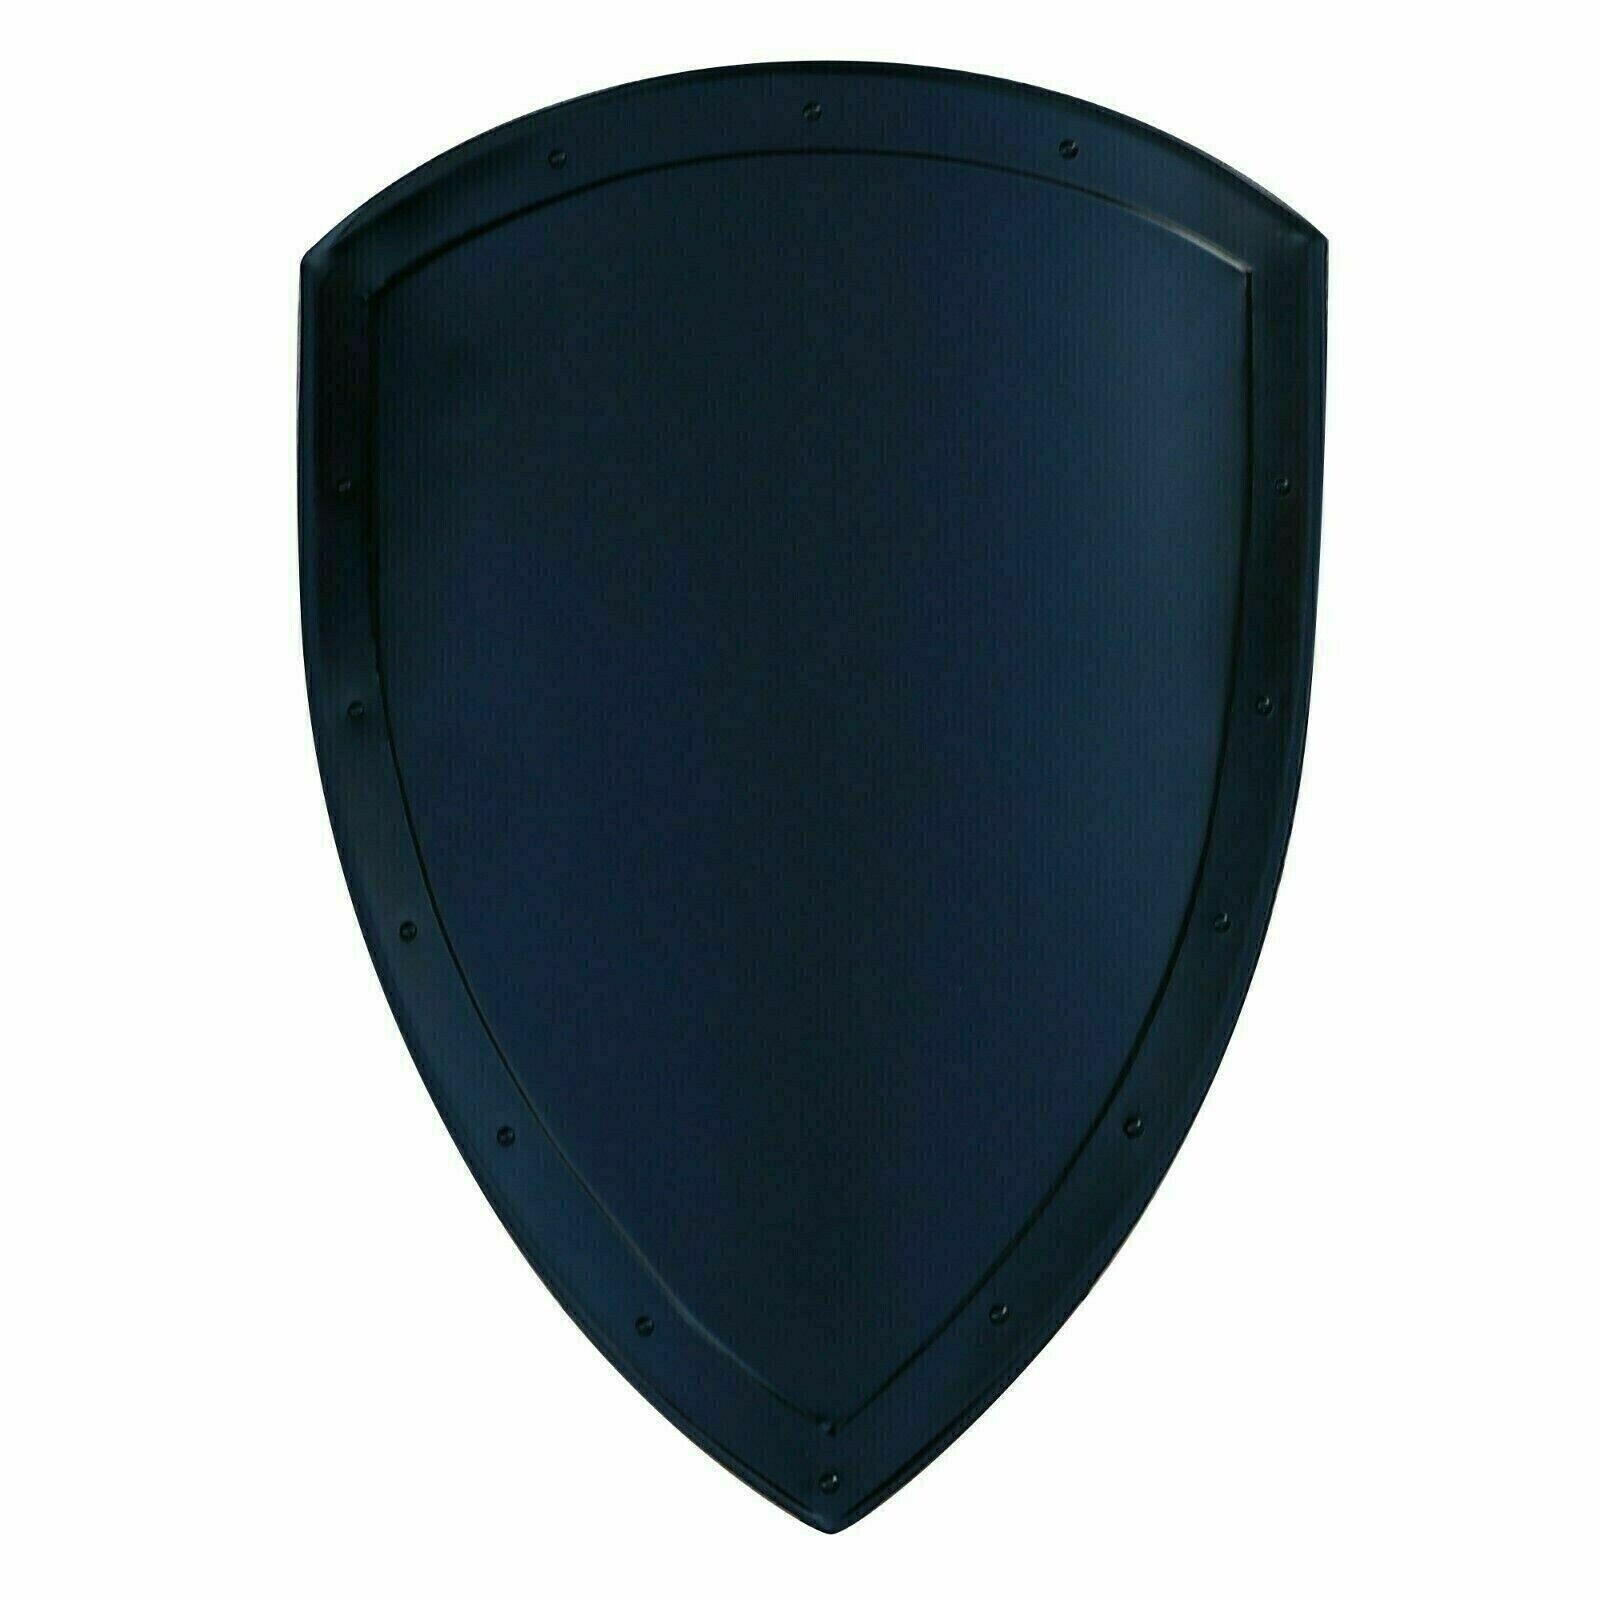 Medieval Armor Functional Historical Replica Solid Black Heater Costume Shield